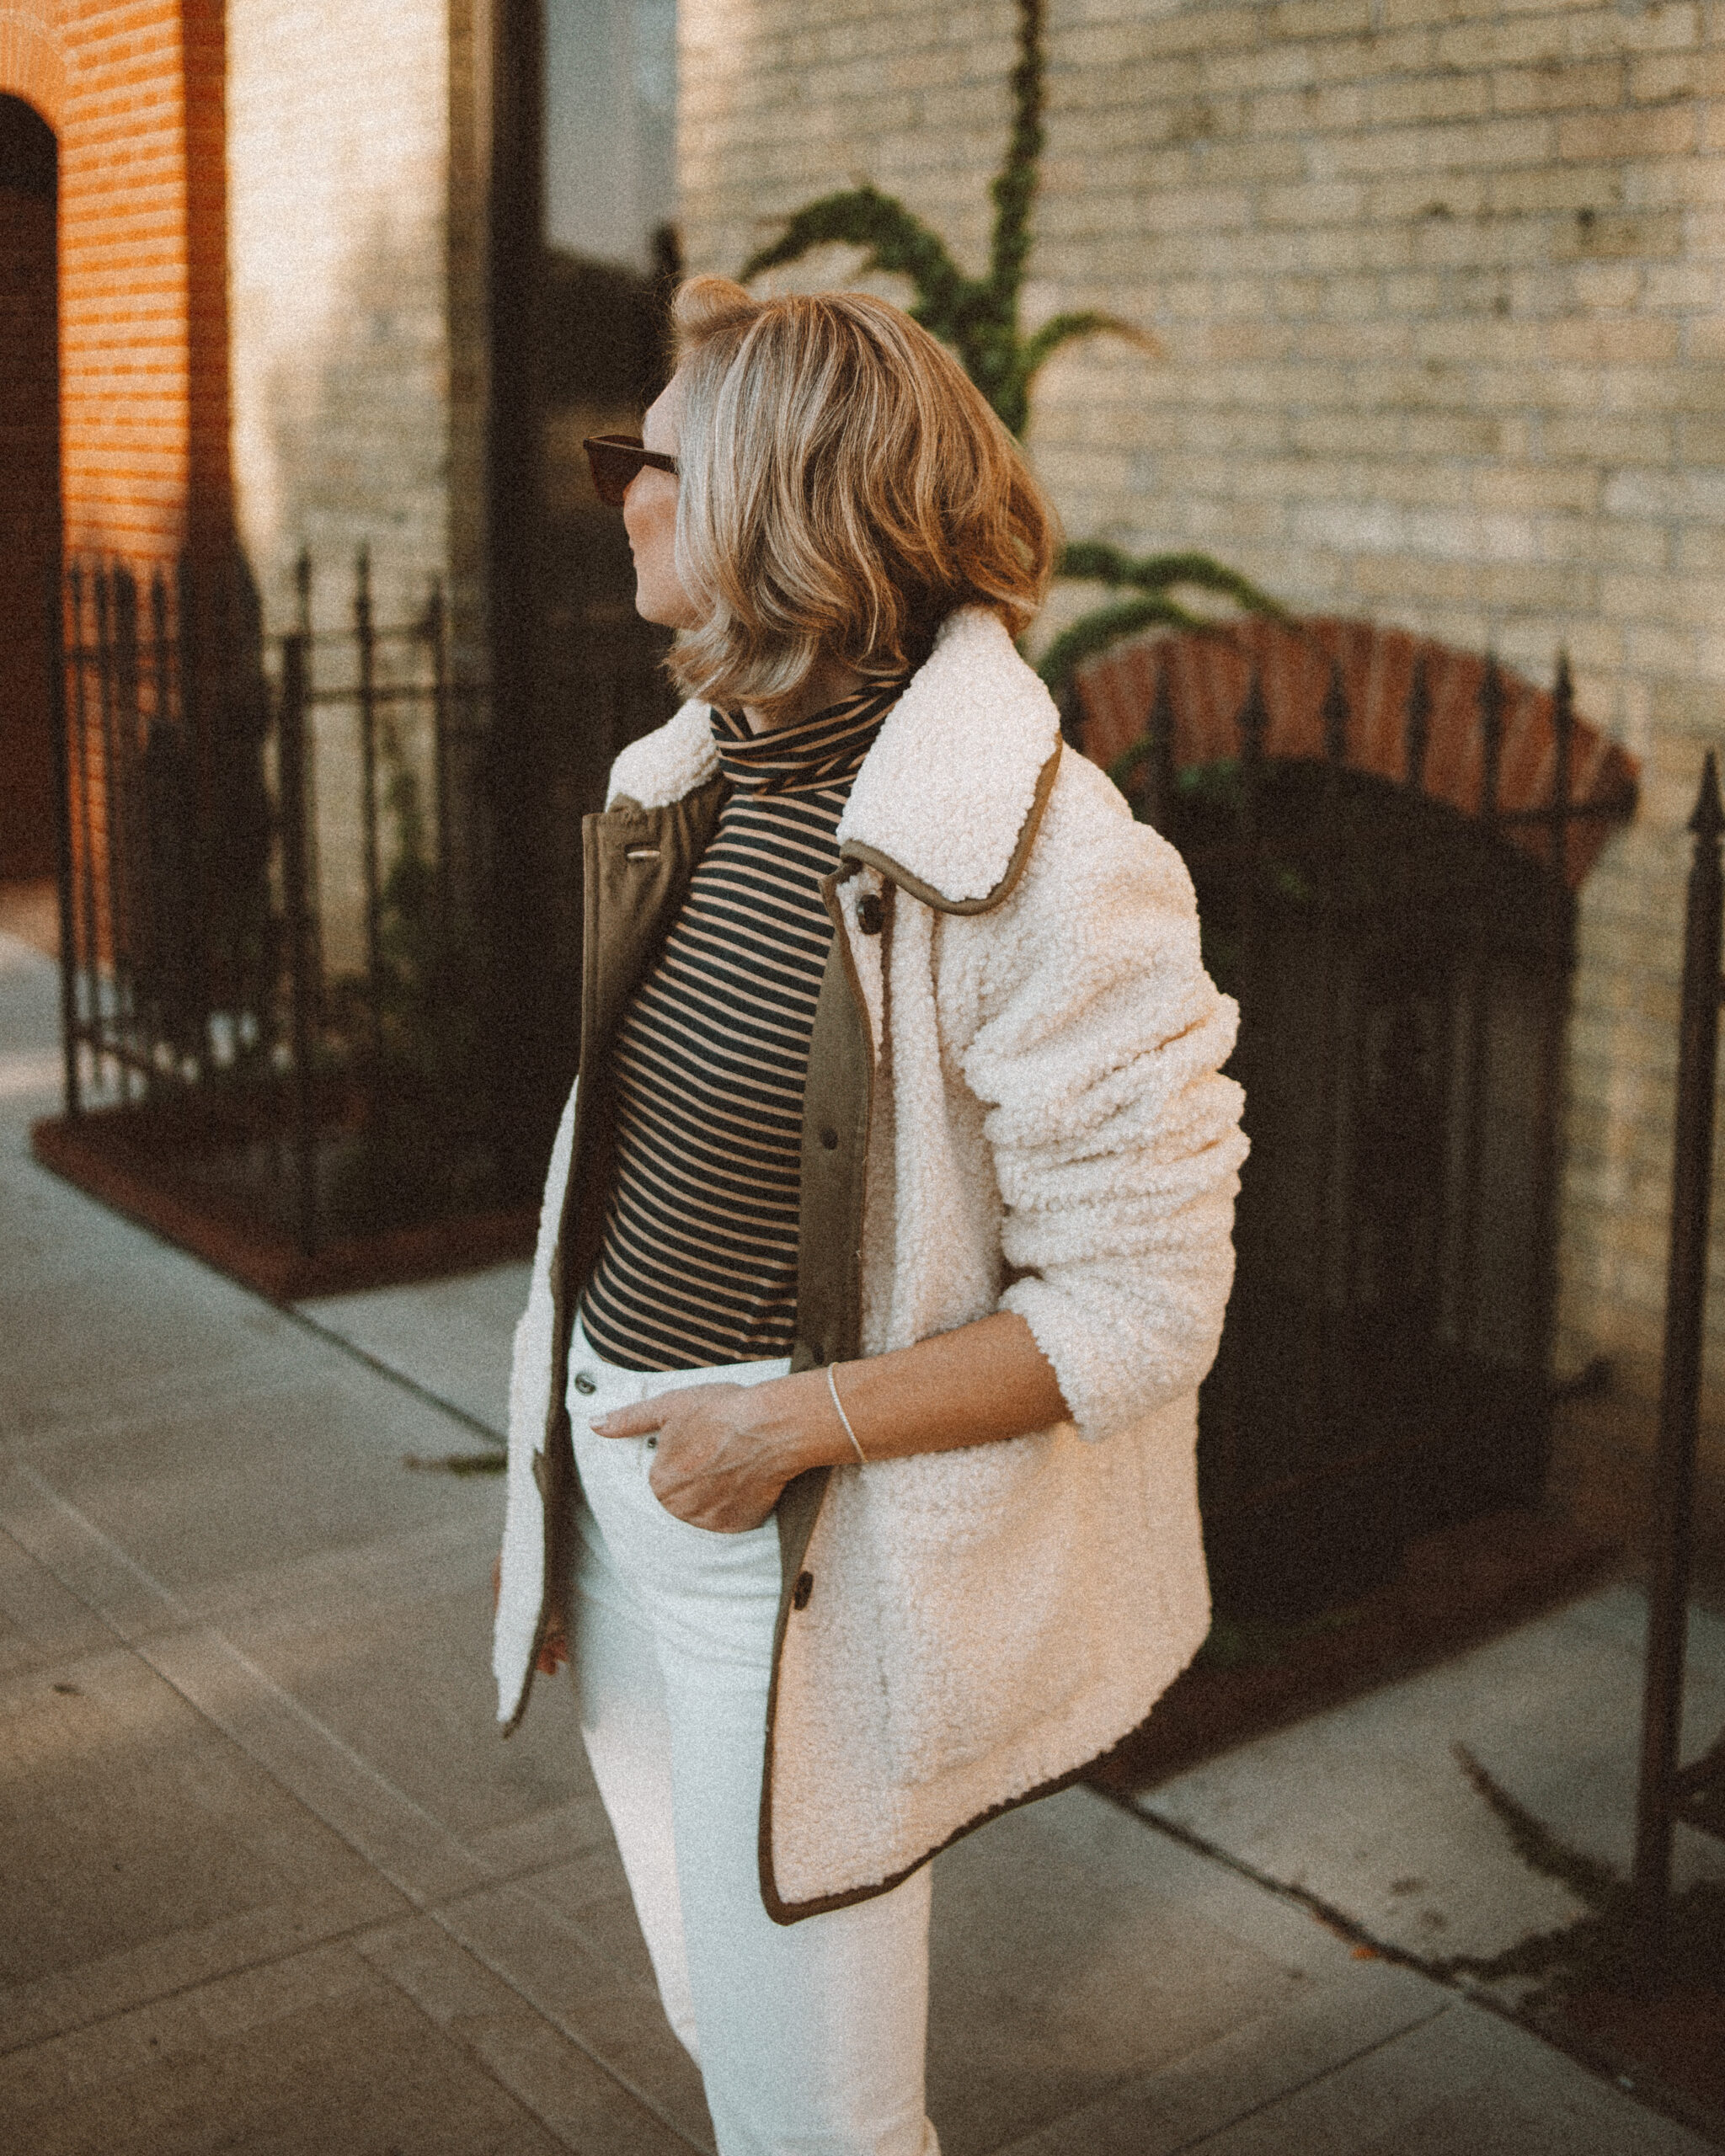 Karin Emily wears the perfect pair of corduroy pants with a striped turtleneck, and sherpa jacket